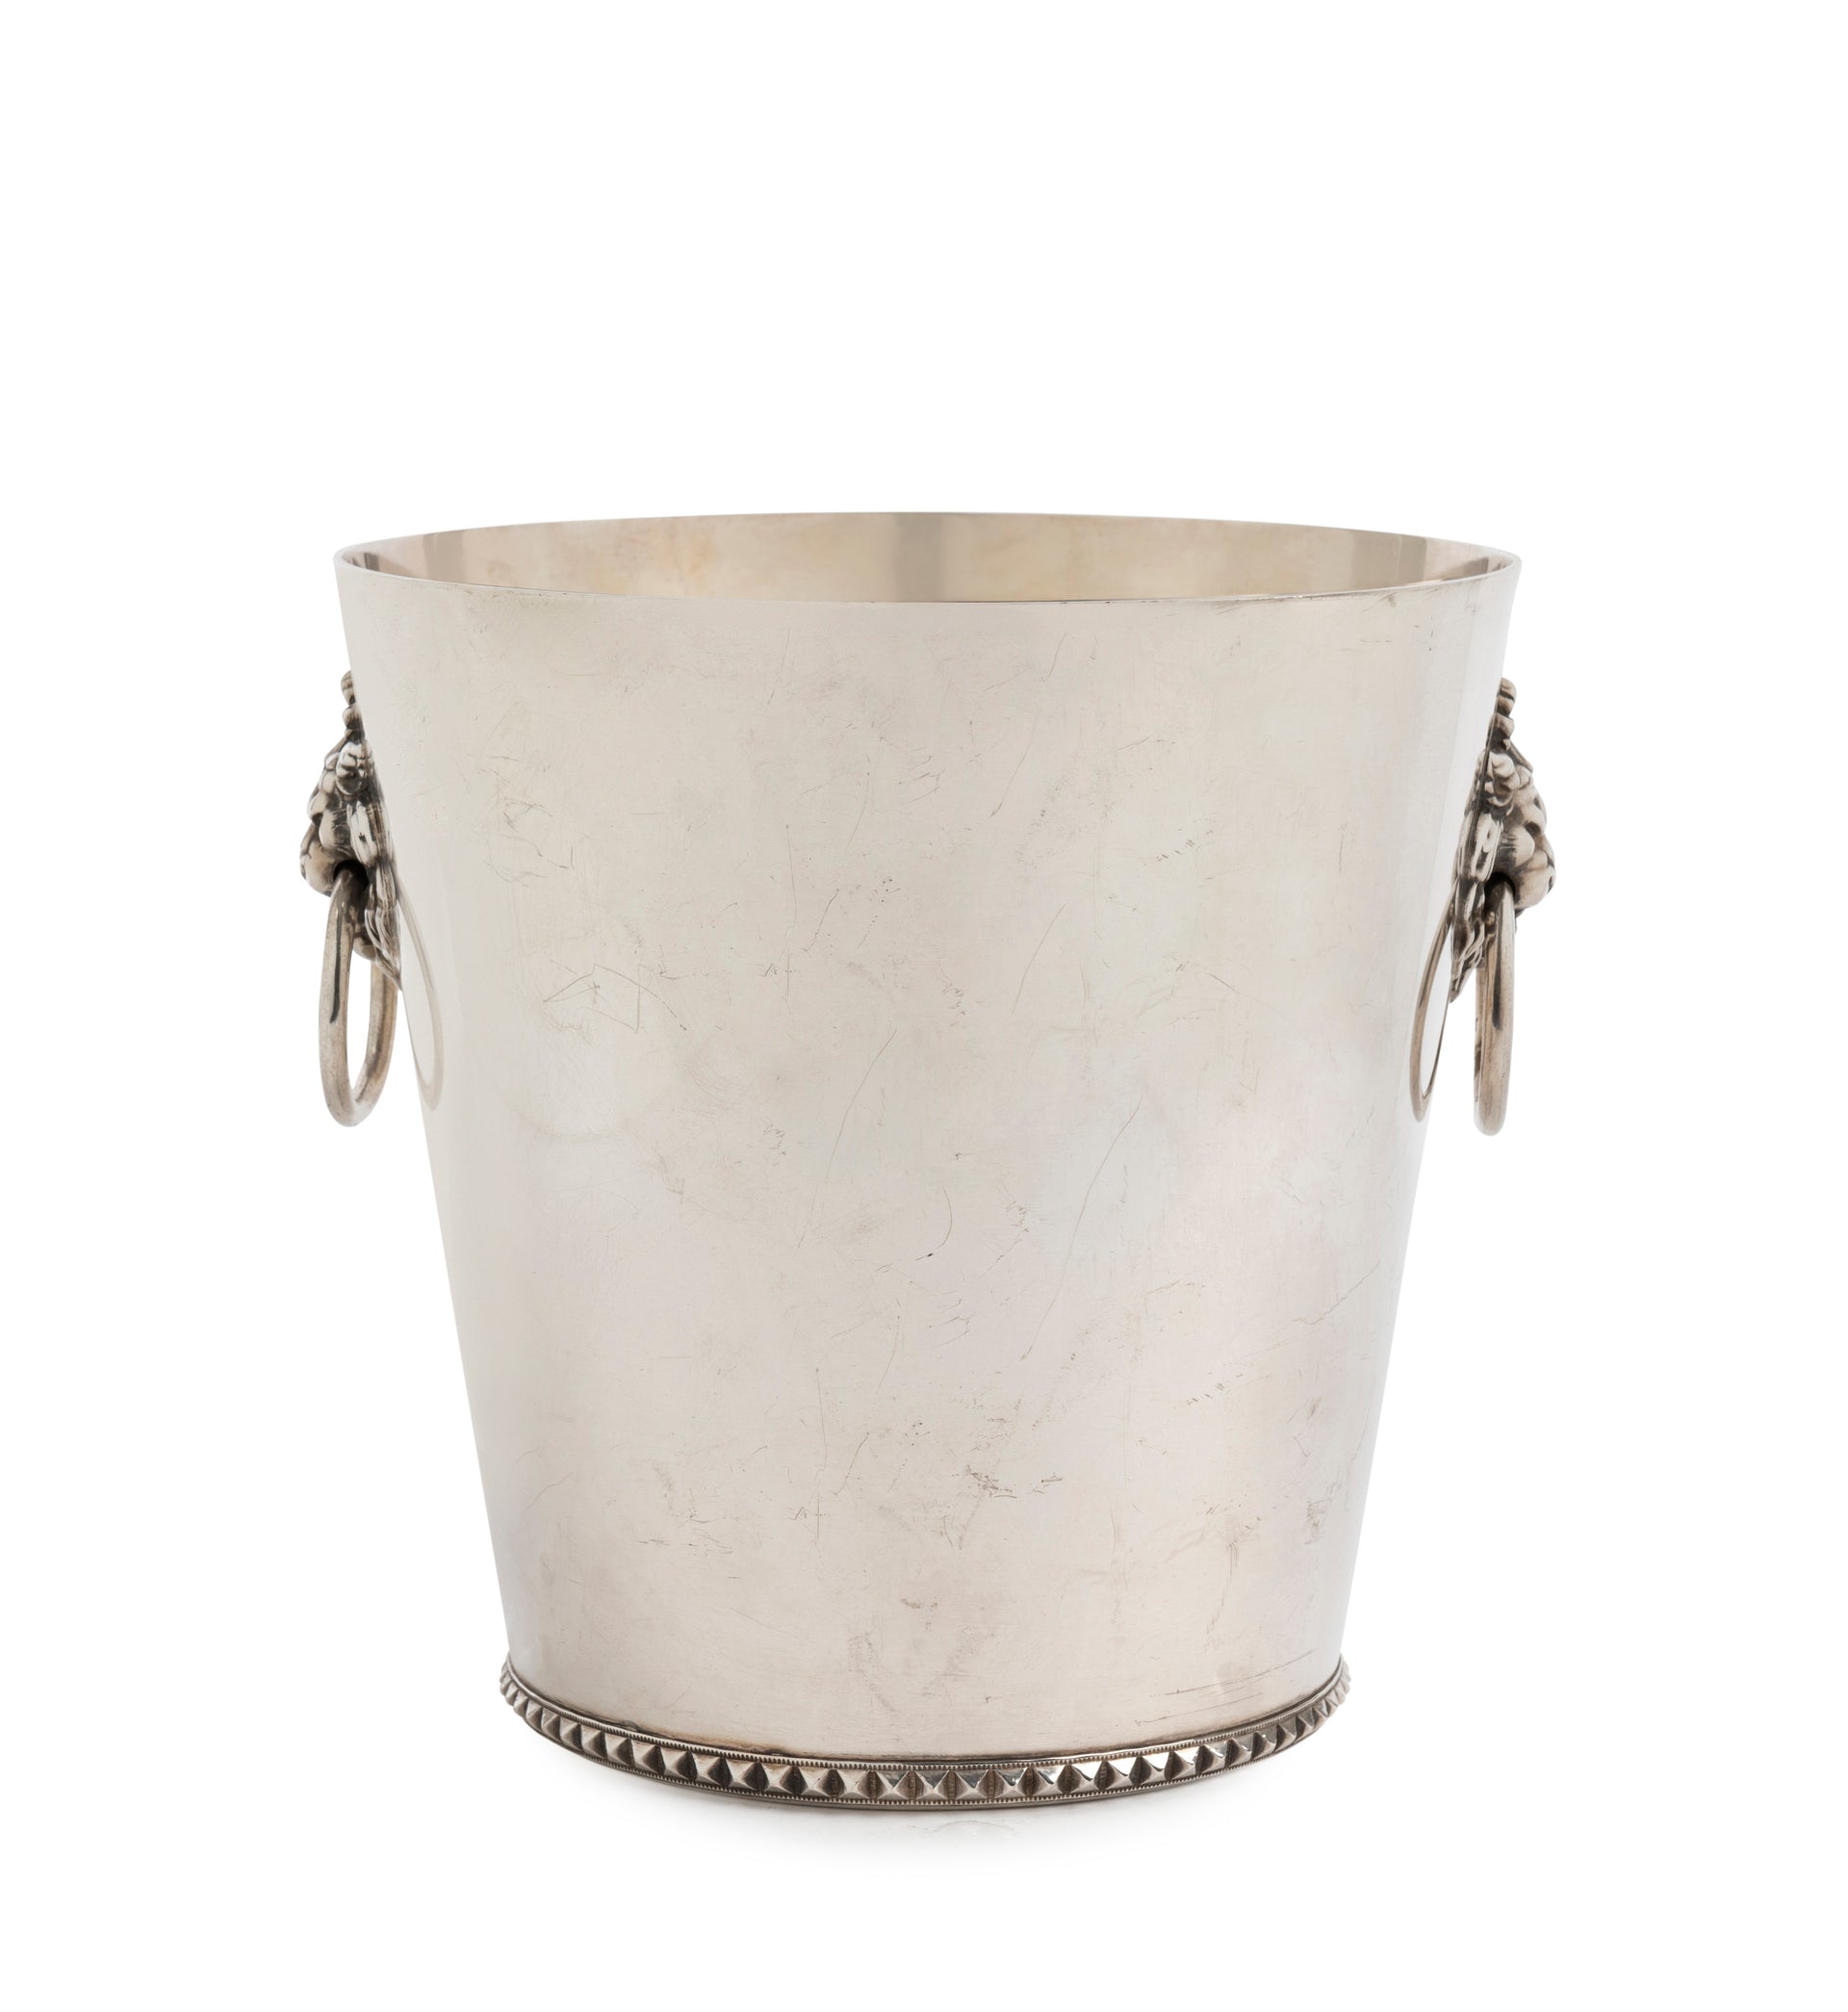 SOLD A French vintage silver plated twin handled wine cooler, Circa 1950